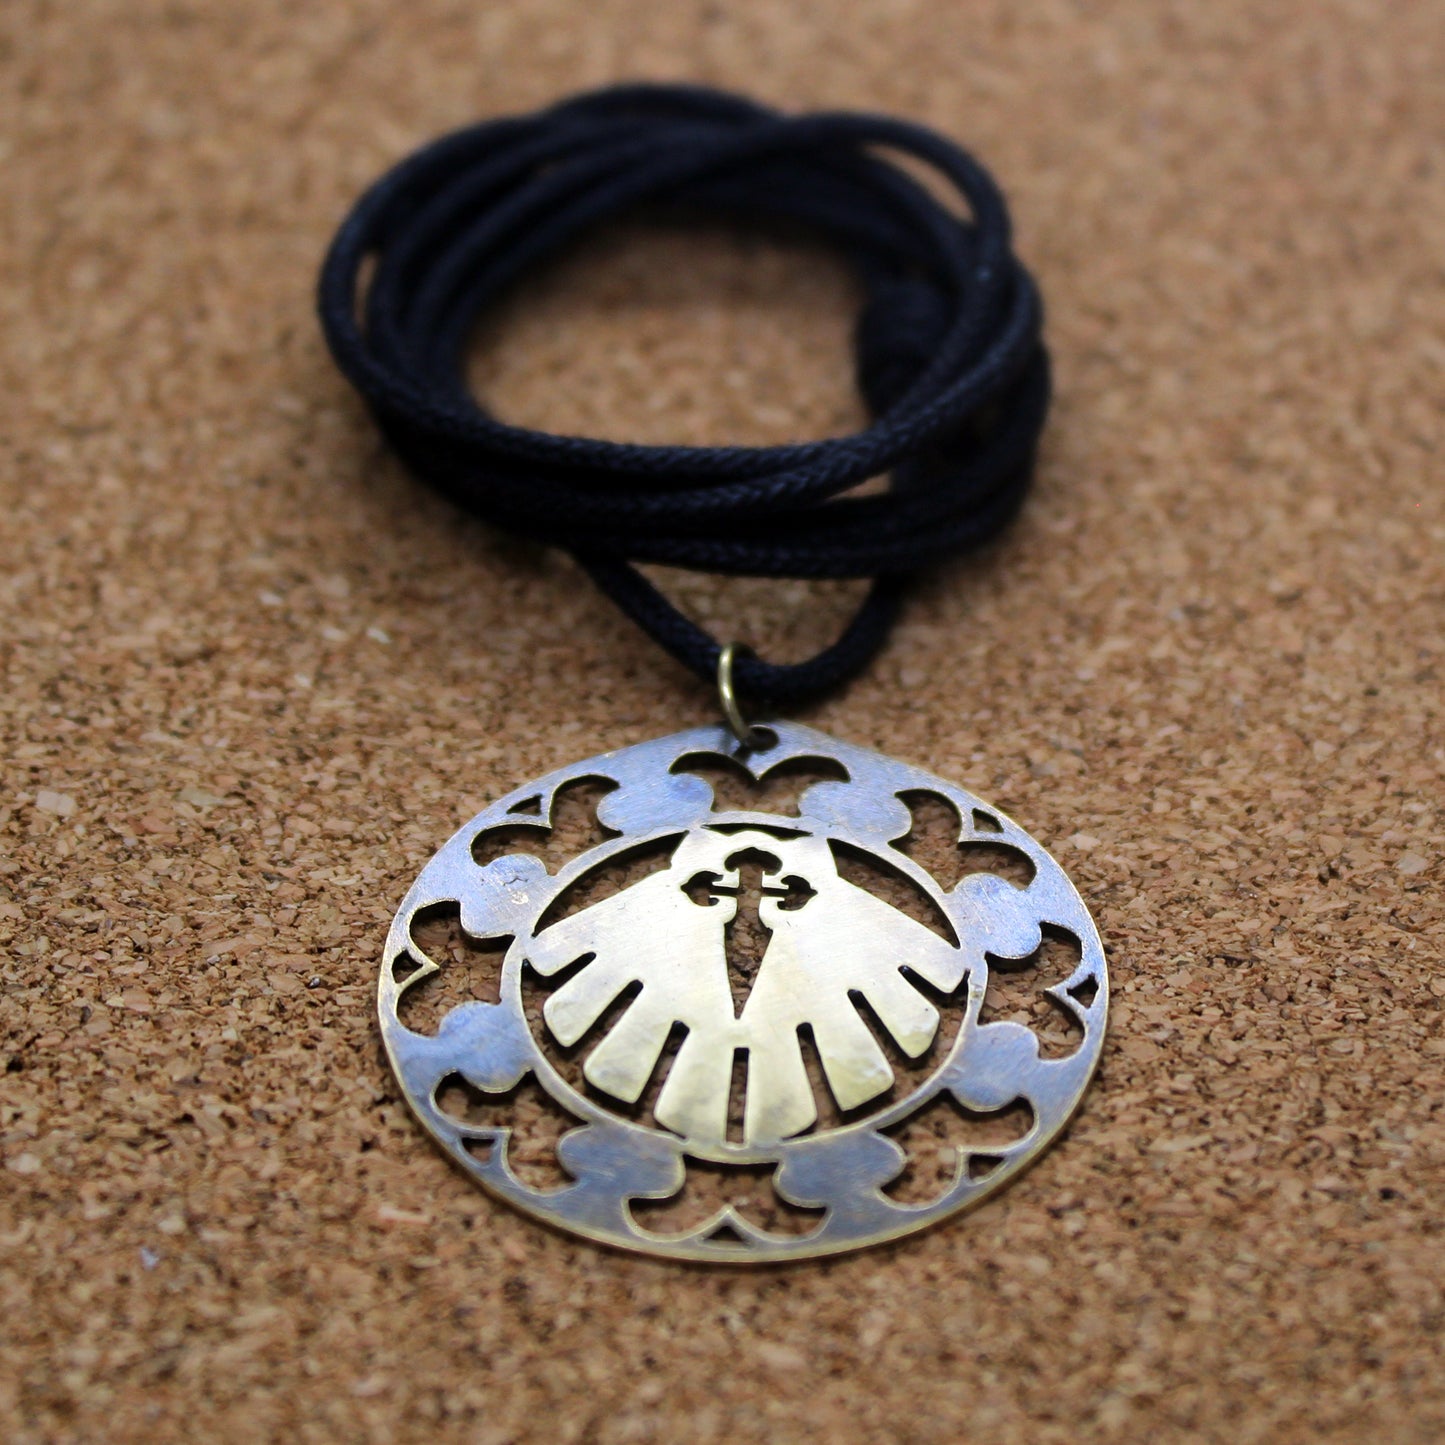 Shell medallion of the Camino and Cross of Santiago openwork in brass